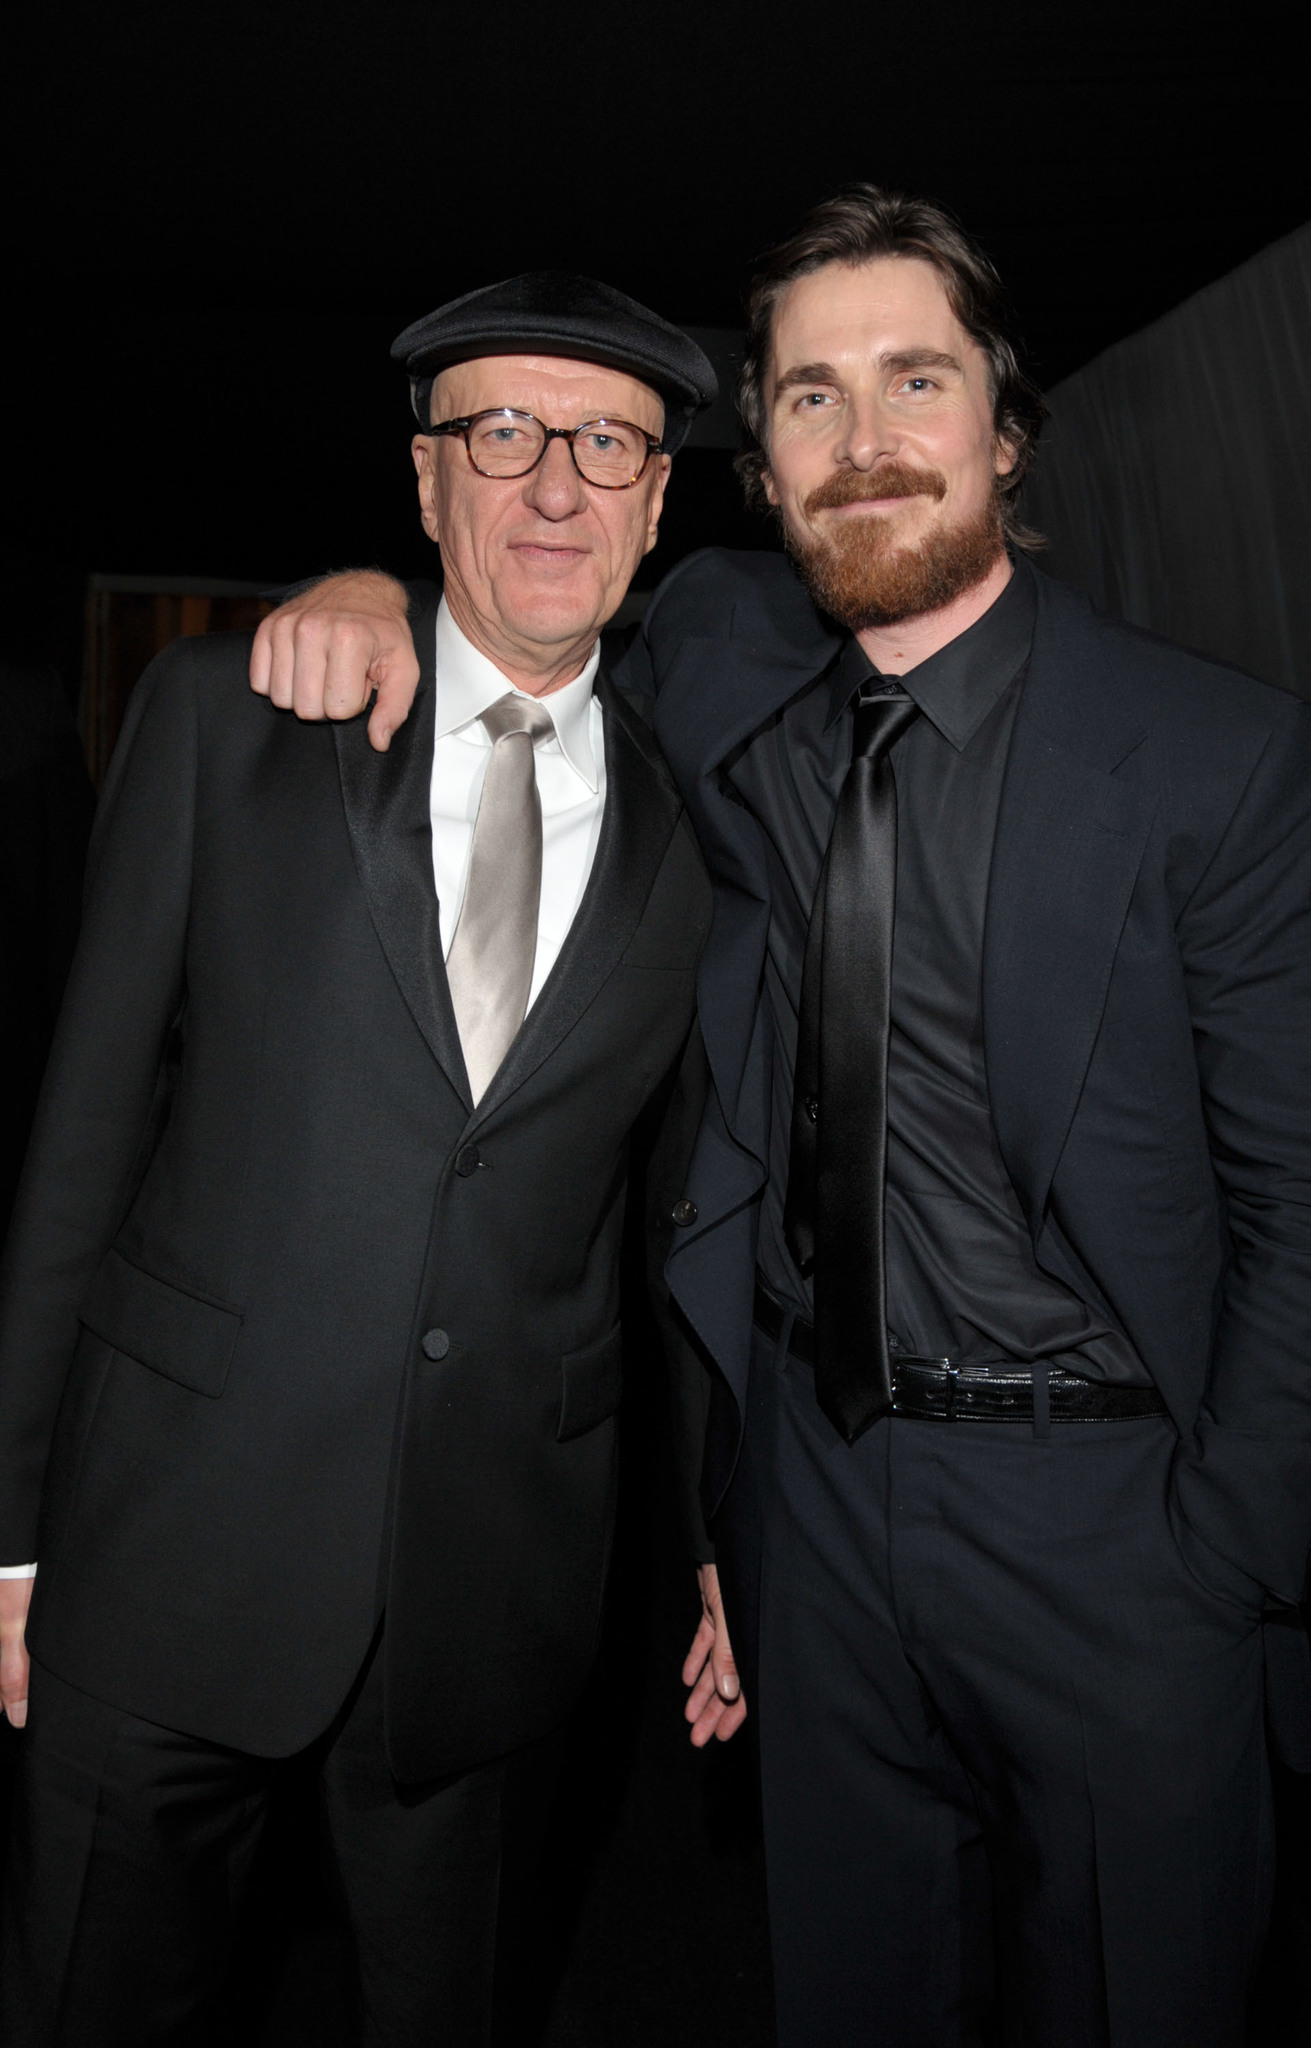 Christian Bale and Geoffrey Rush